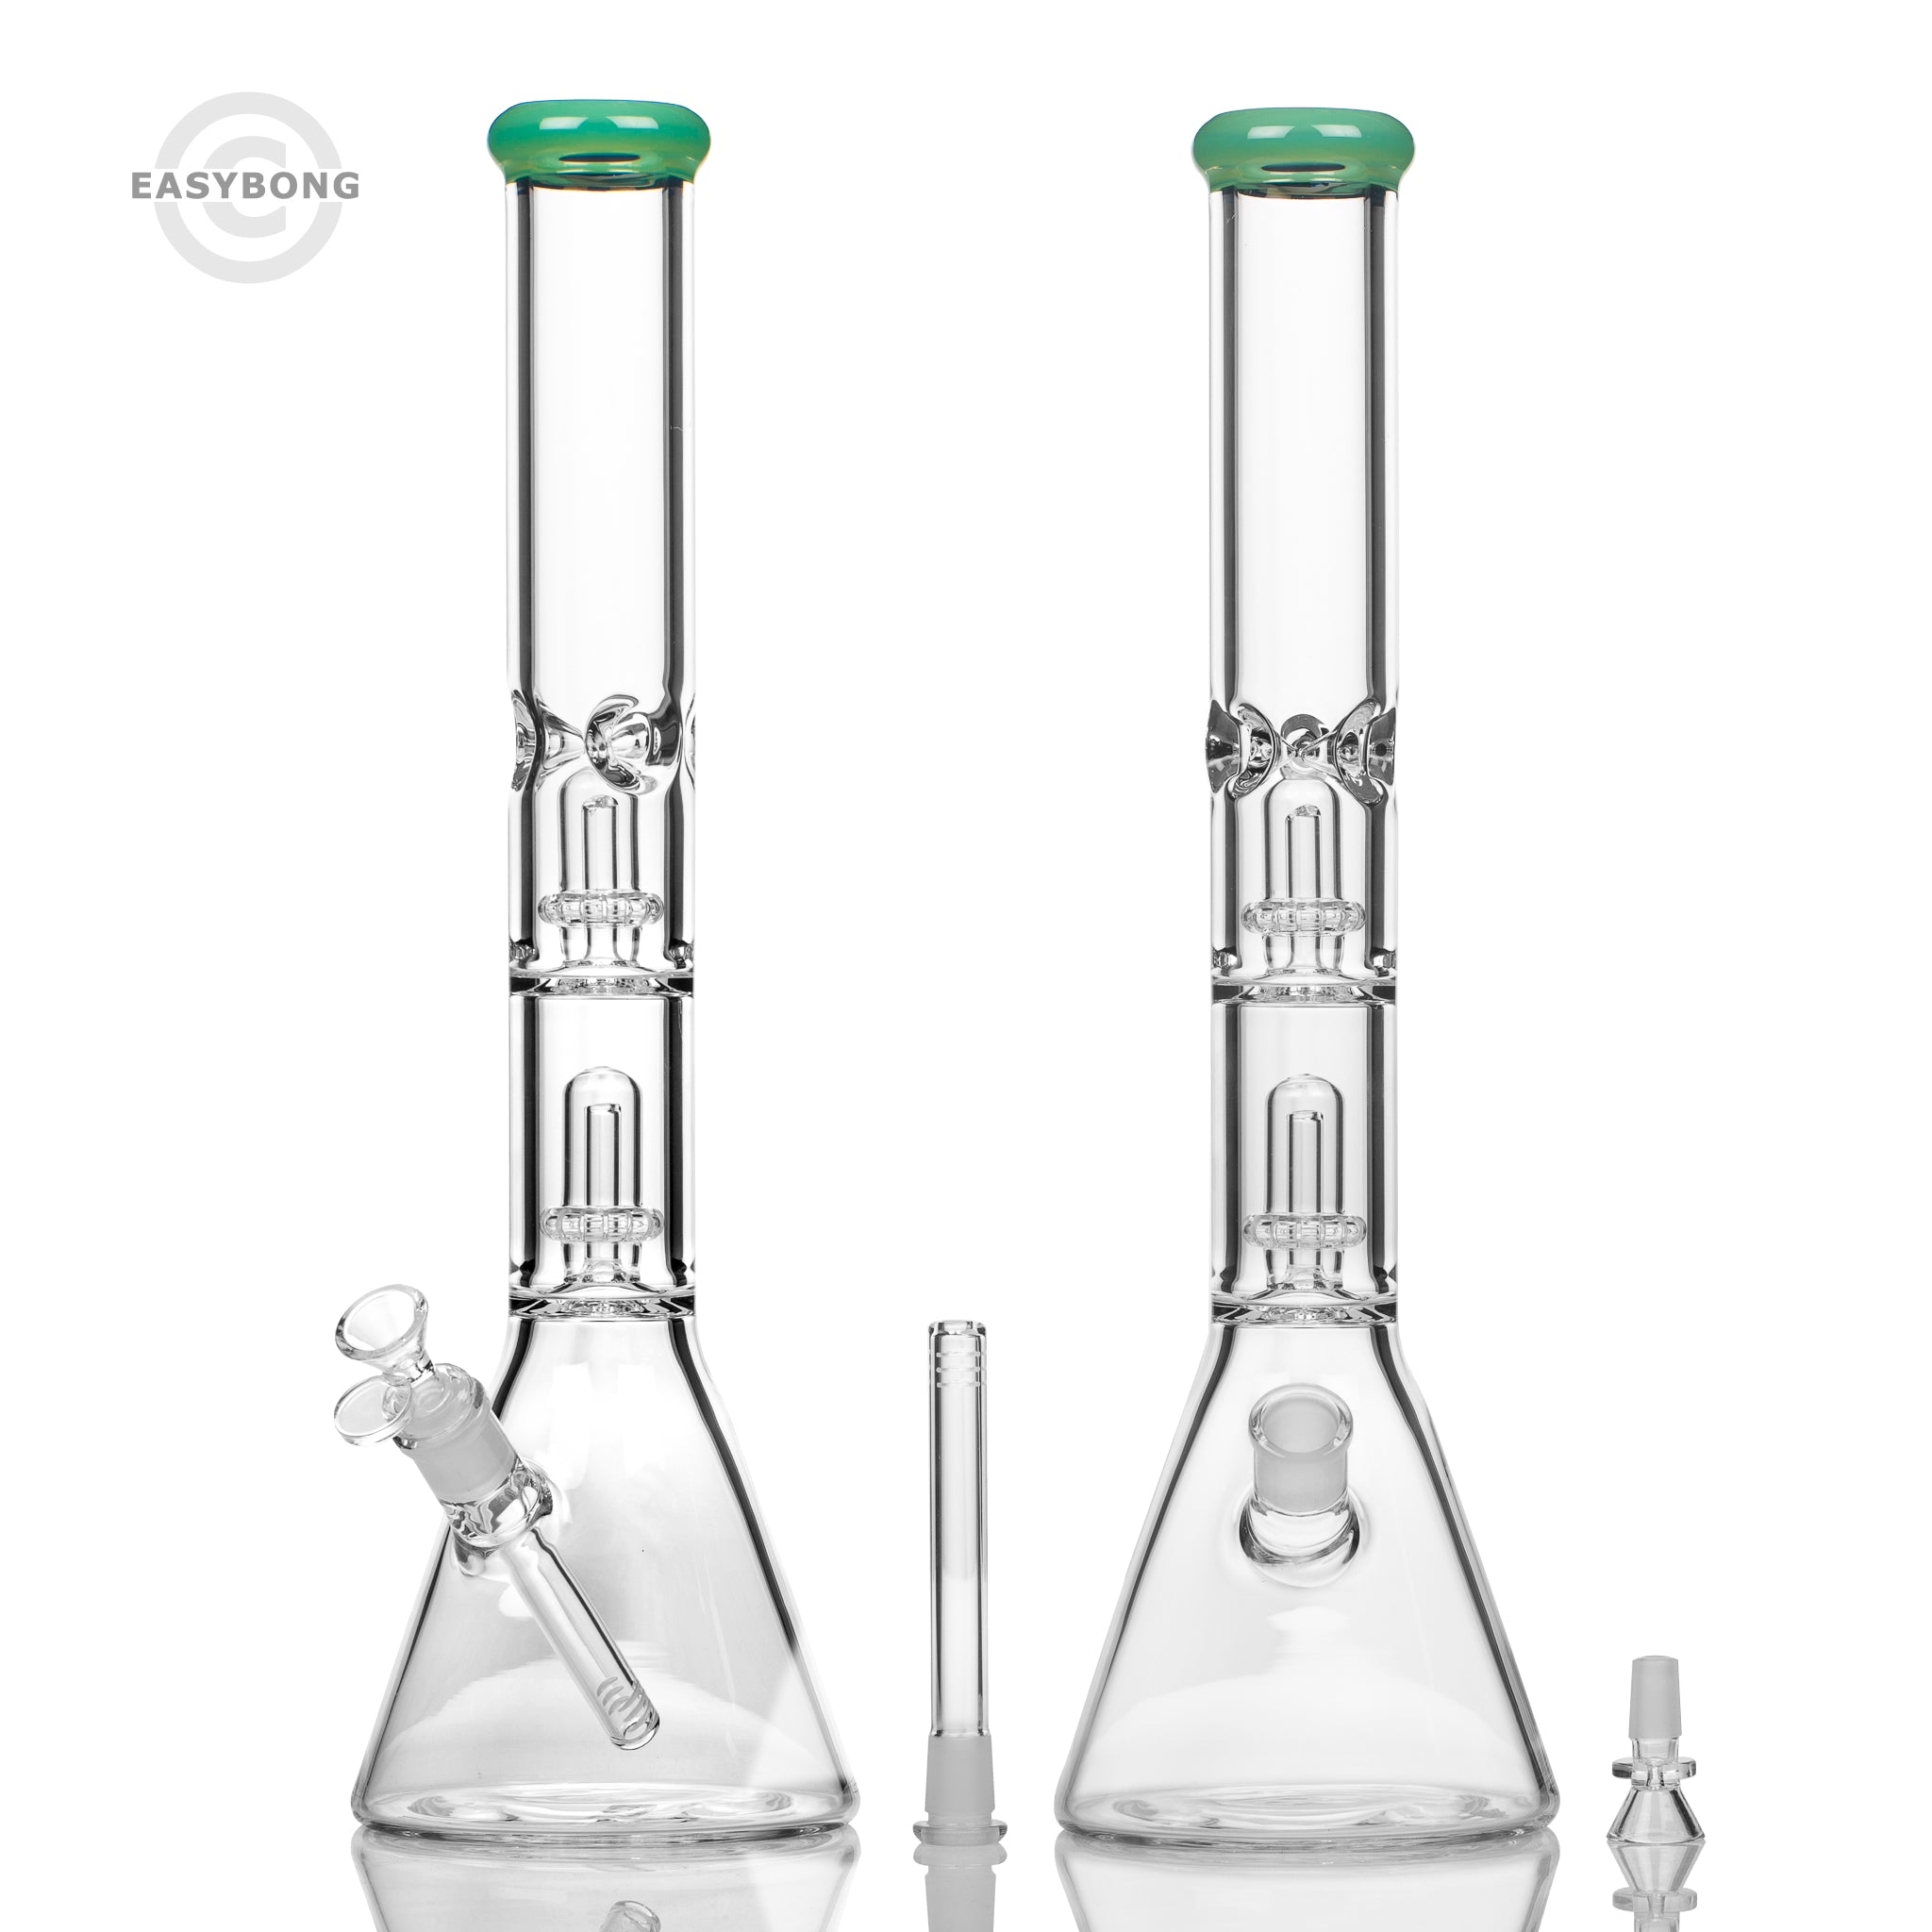 Large glass beaker bongs with stem and cone as well as twin percs.